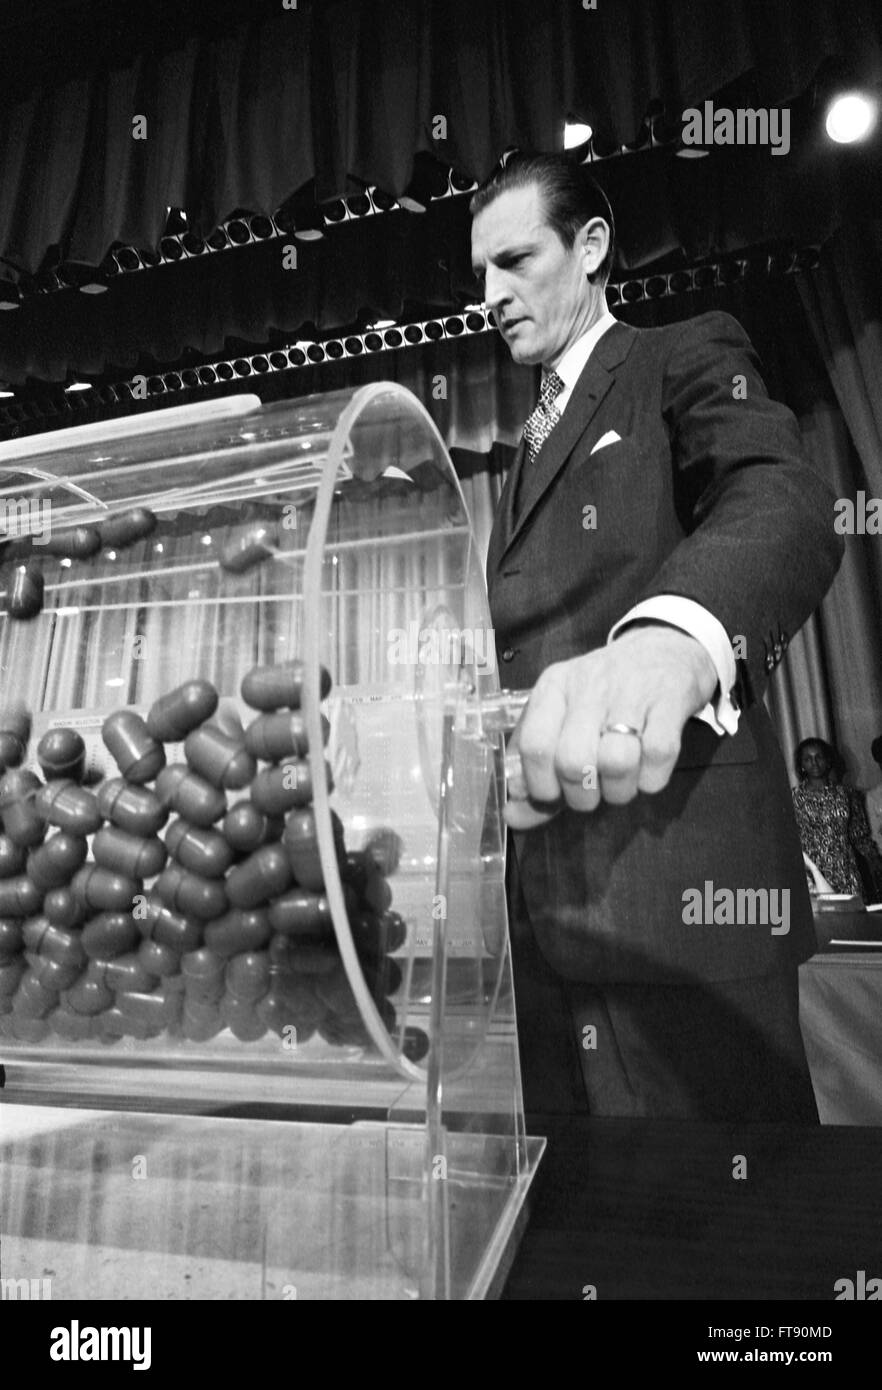 Vietnam Draft. Curtis W. Tarr, director of the Selective Service System, making the draw at the annual draft lottery, Commerce Department Auditorium, Washington DC, February 1972. Stock Photo